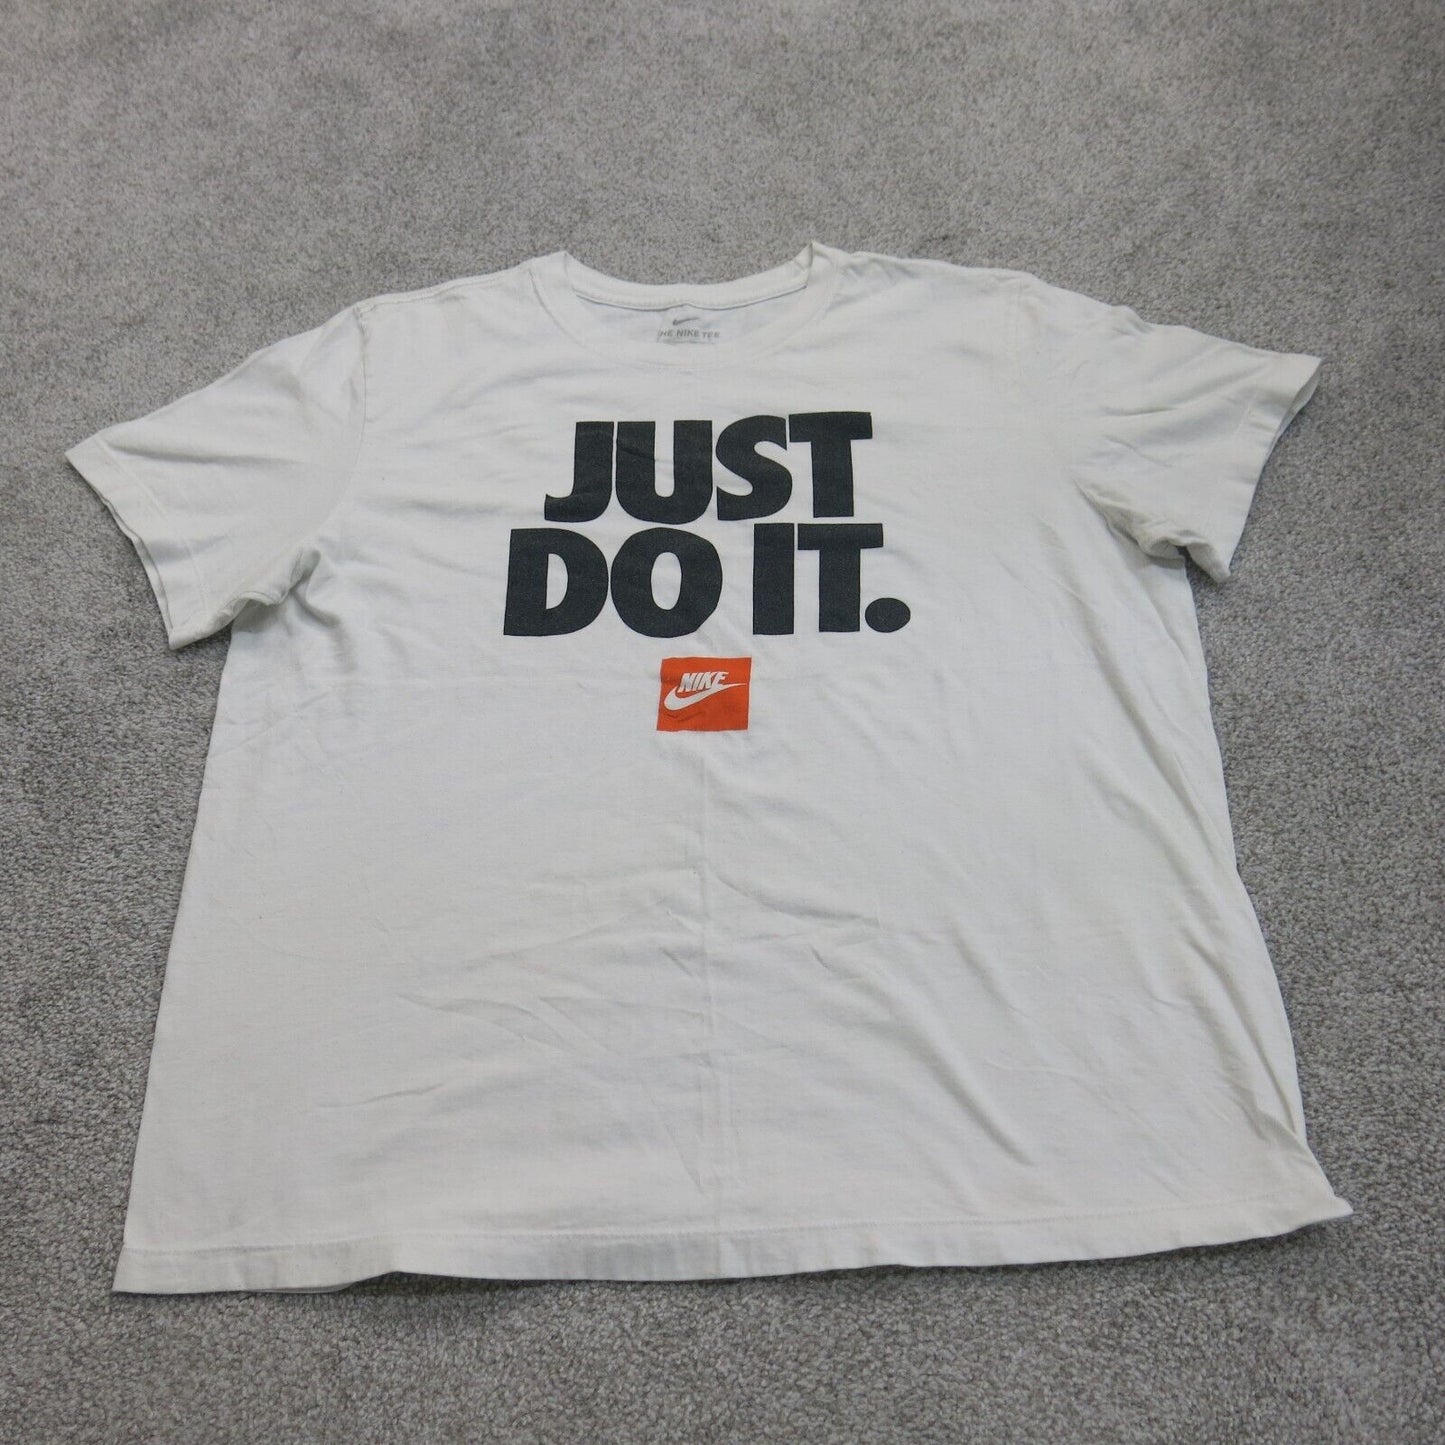 The Nike Tee Mens T-Shirt Dri Fit Crew Neck Graphic Just Do It White Size XL